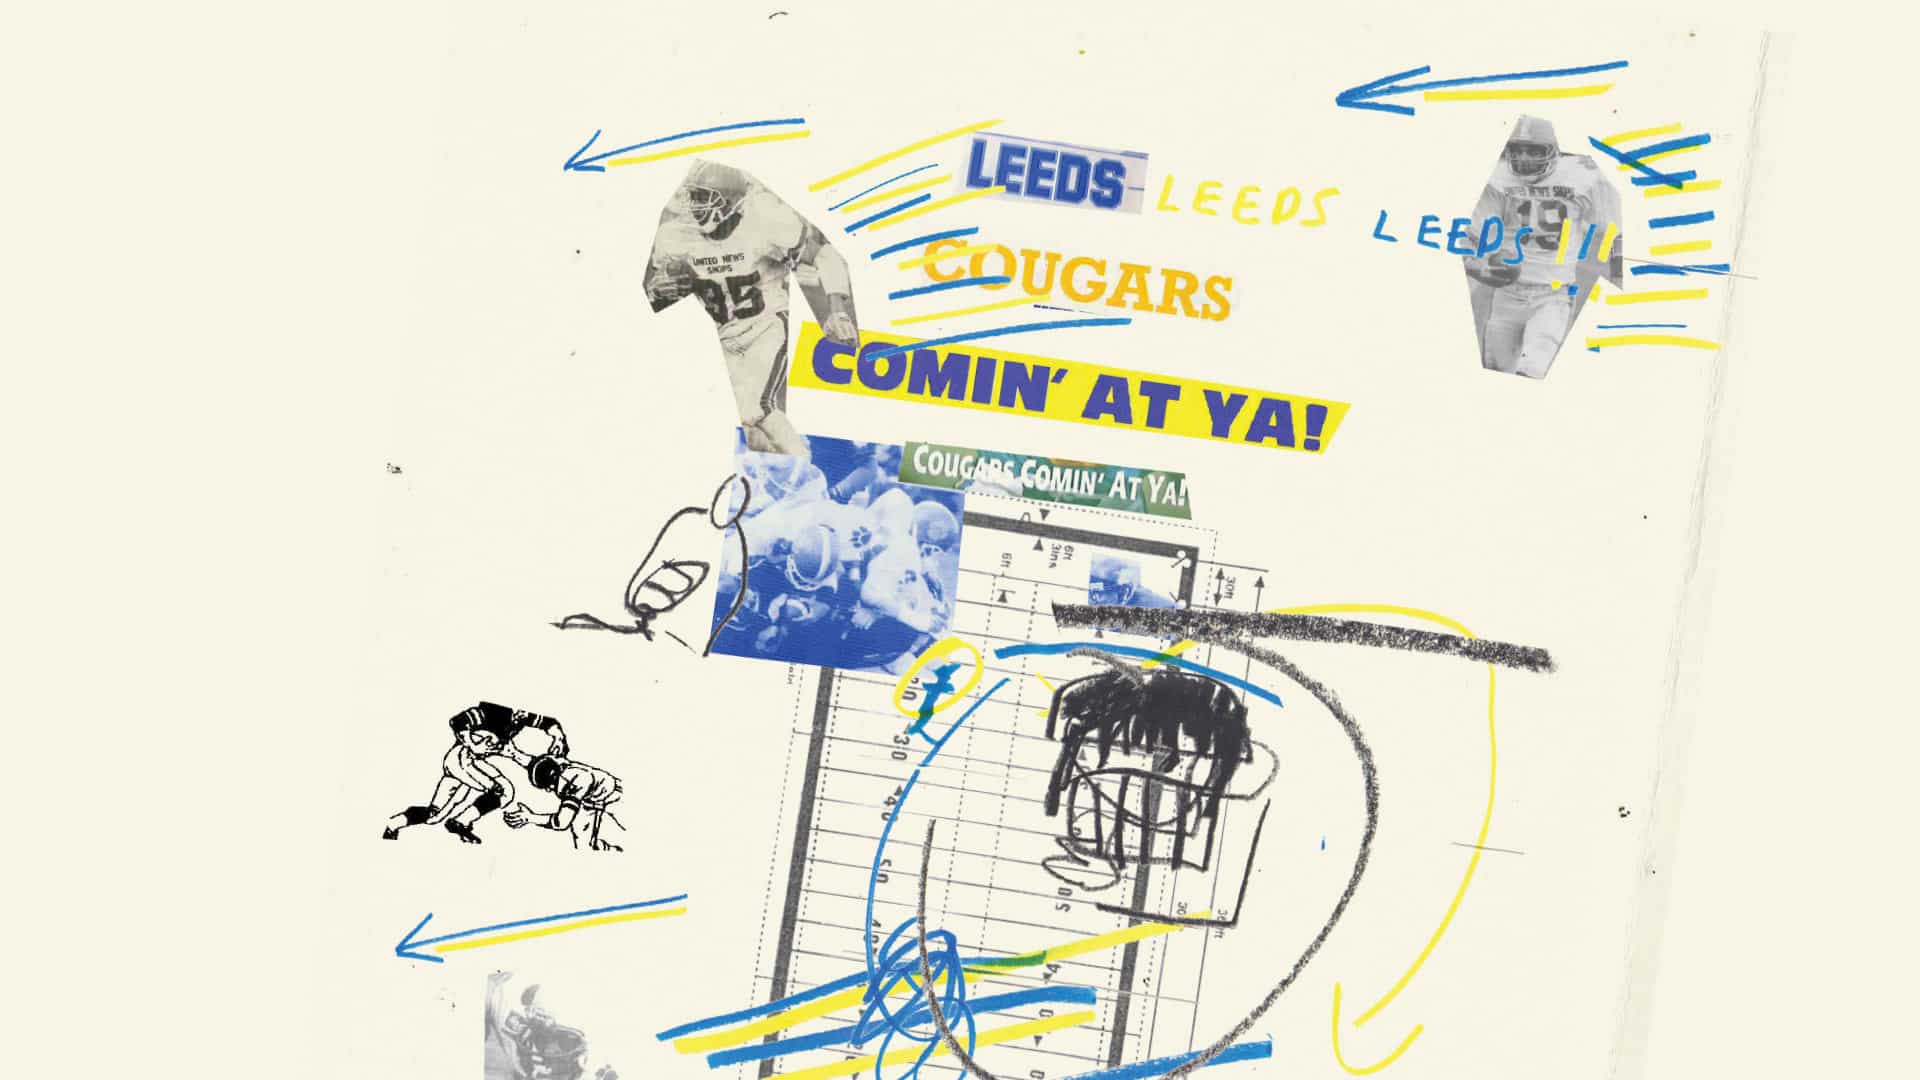 A scrapbook style collage of American football doodles, photos of Leeds Cougars players, a diagram of an American football pitch, and the slogan 'Leeds Cougars Comin' At Ya!'